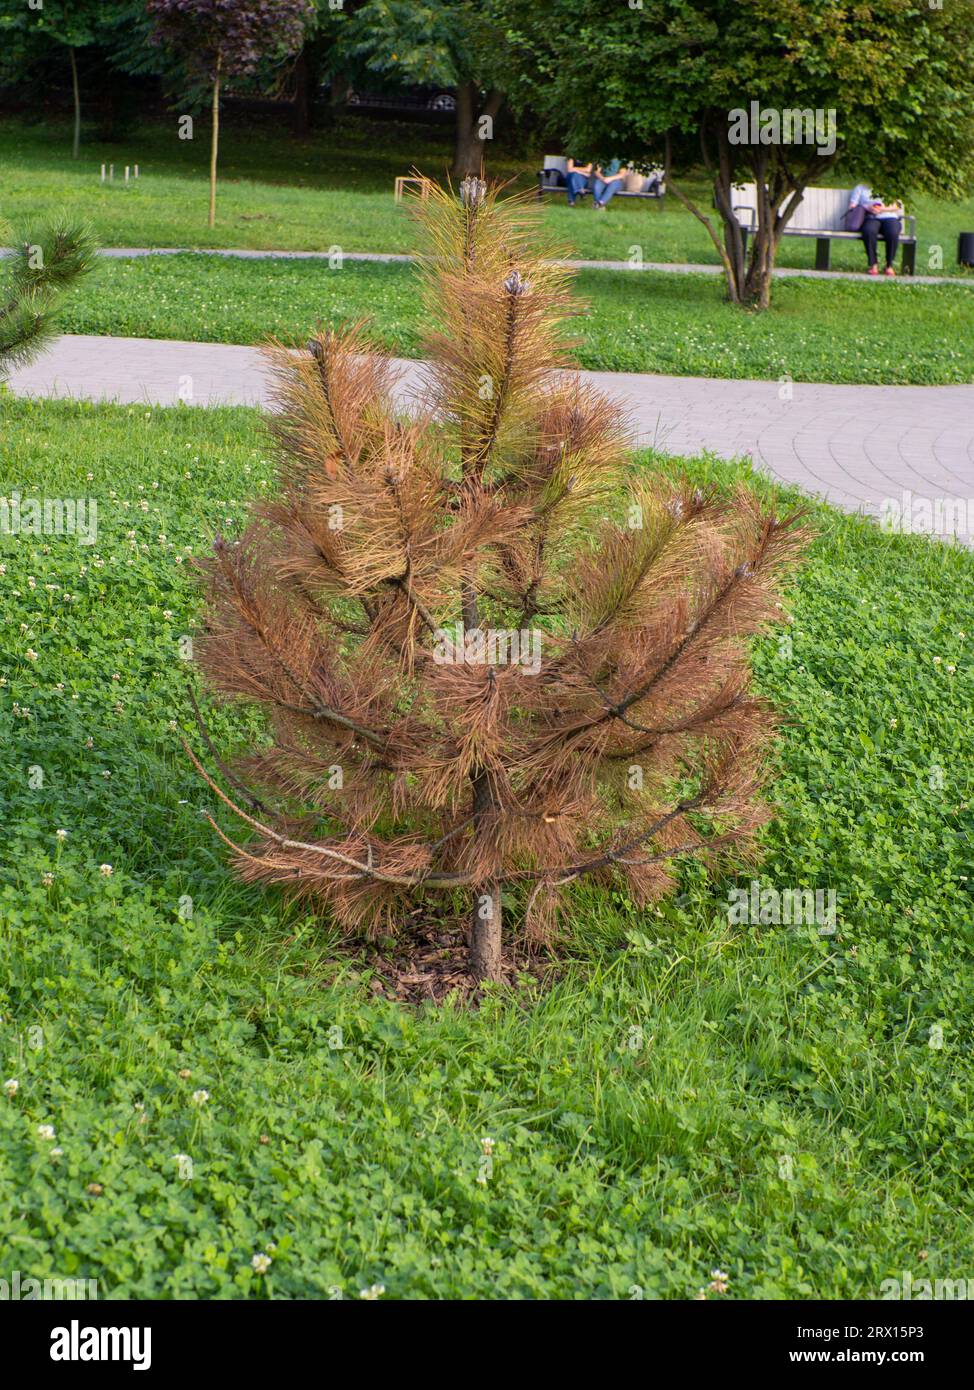 Coniferous tree with dried branches. Pinus nigra problems and disease. Black pine, Austrian pine tree is drying up, turning yellow and brown. Stock Photo